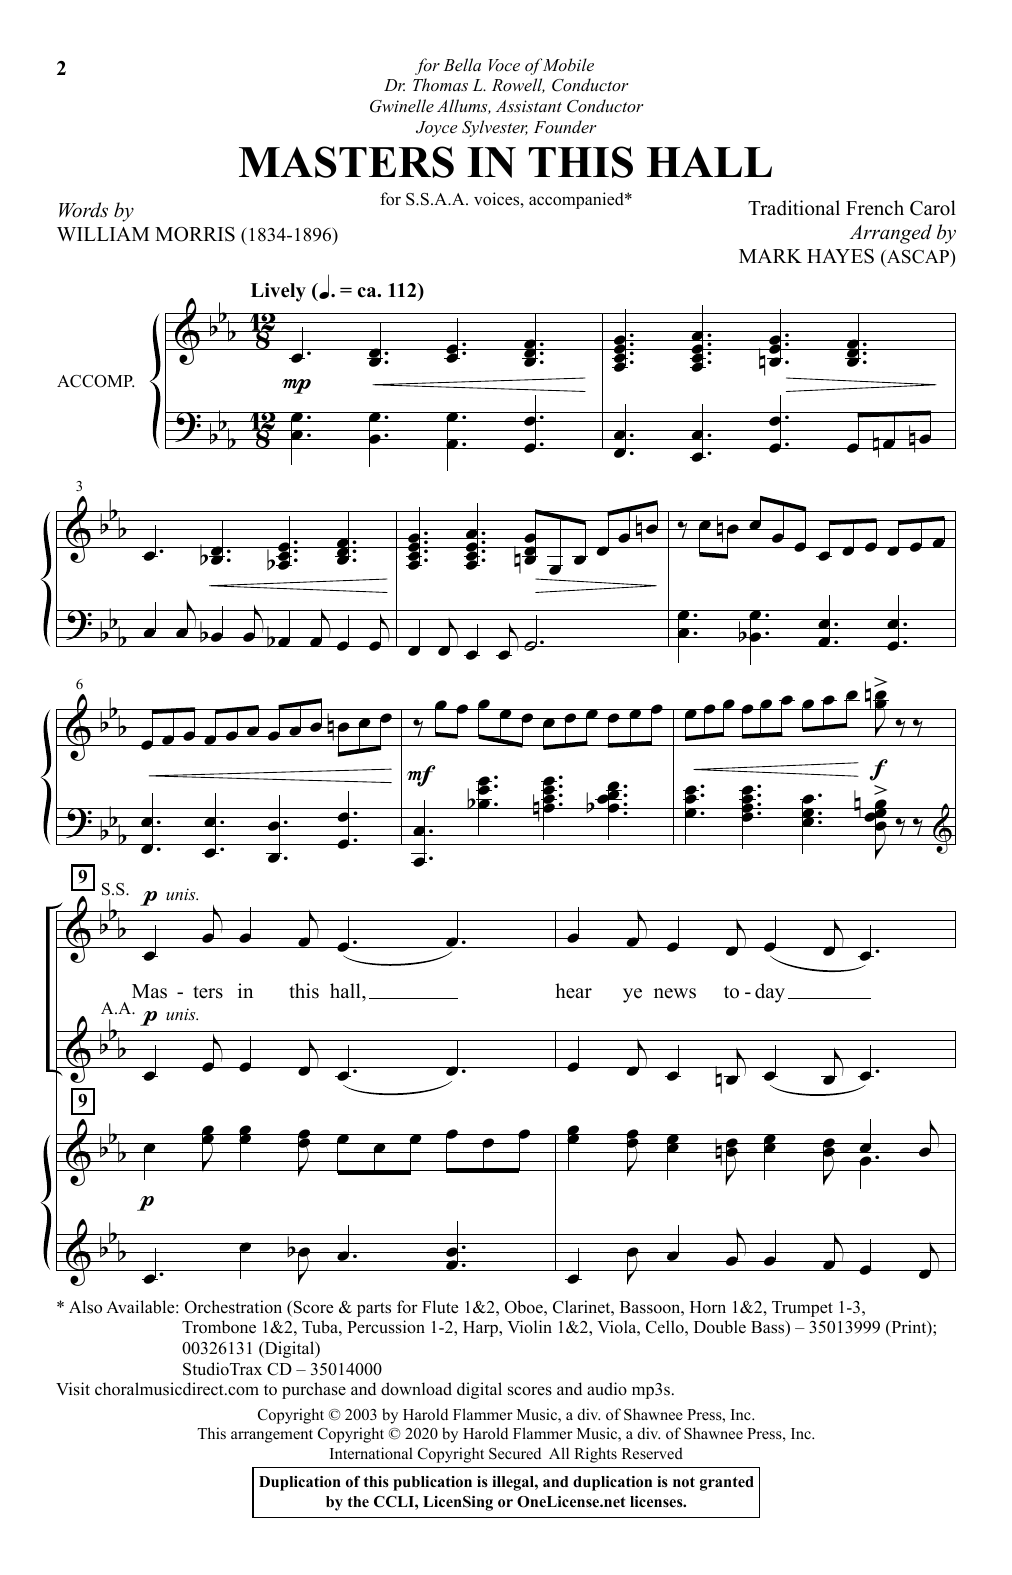 Download William Morris Masters In This Hall (arr. Mark Hayes) Sheet Music